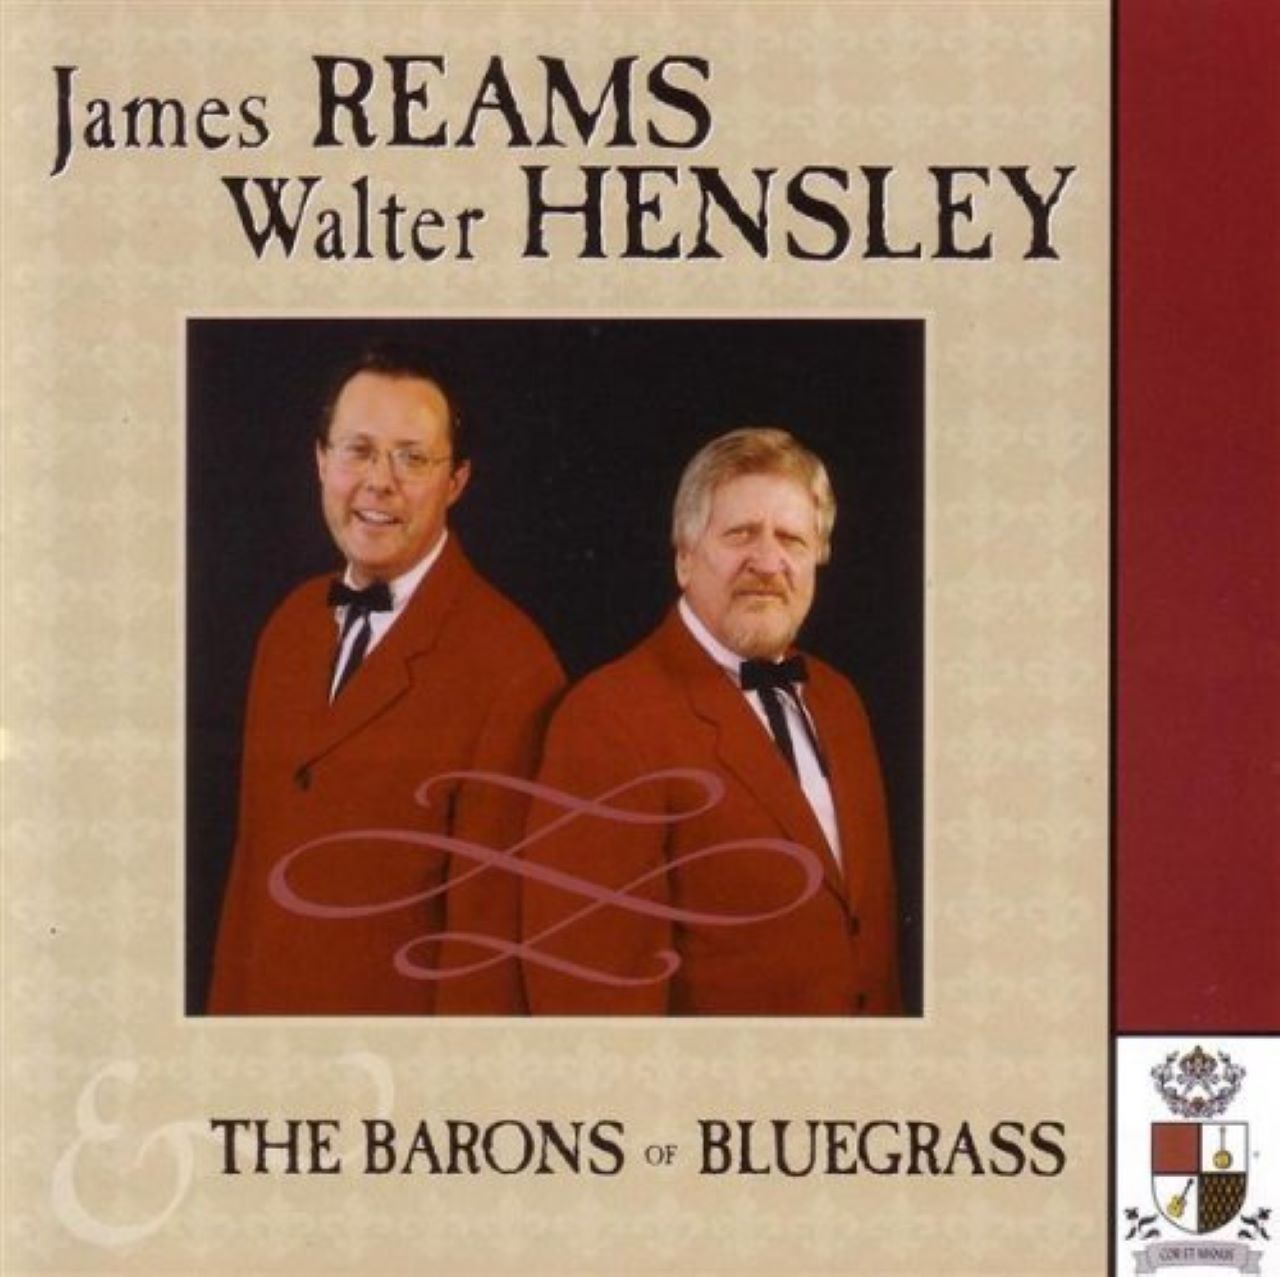 James Reams & Walter Hensley - The Barons Of Bluegrass cover album